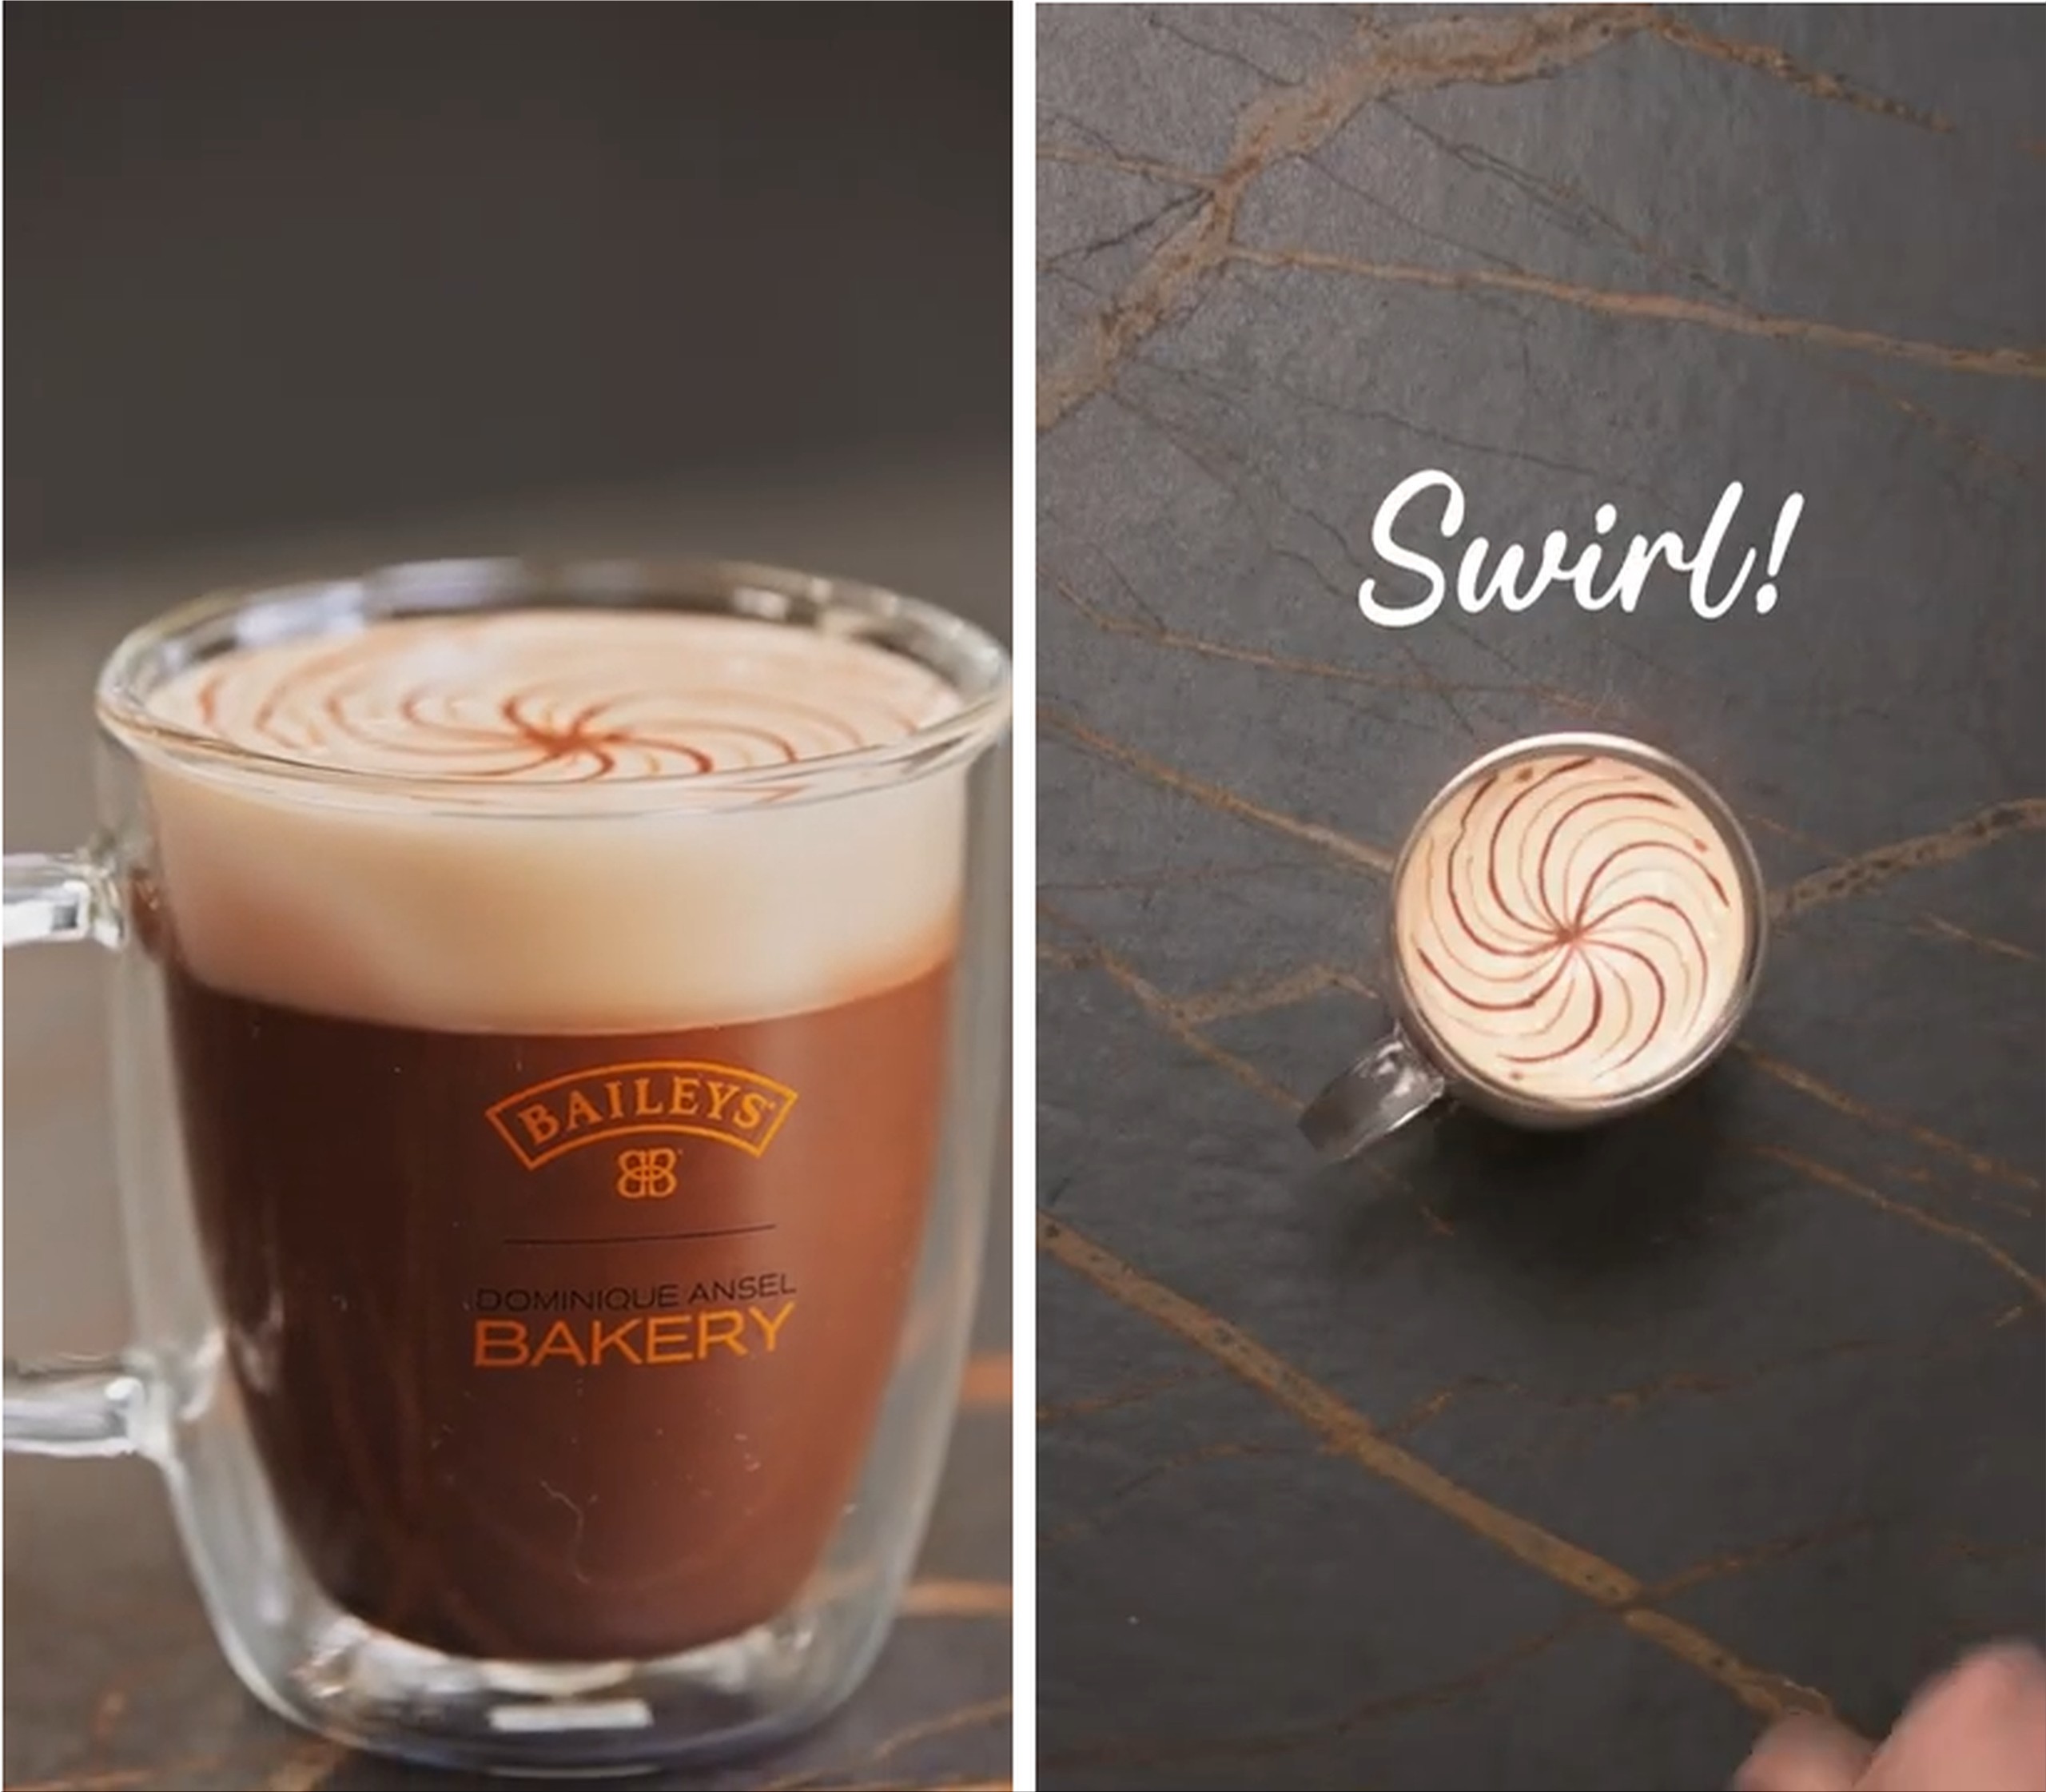 Dominique Ansel Bakery and Baileys Irish Cream team up for hot